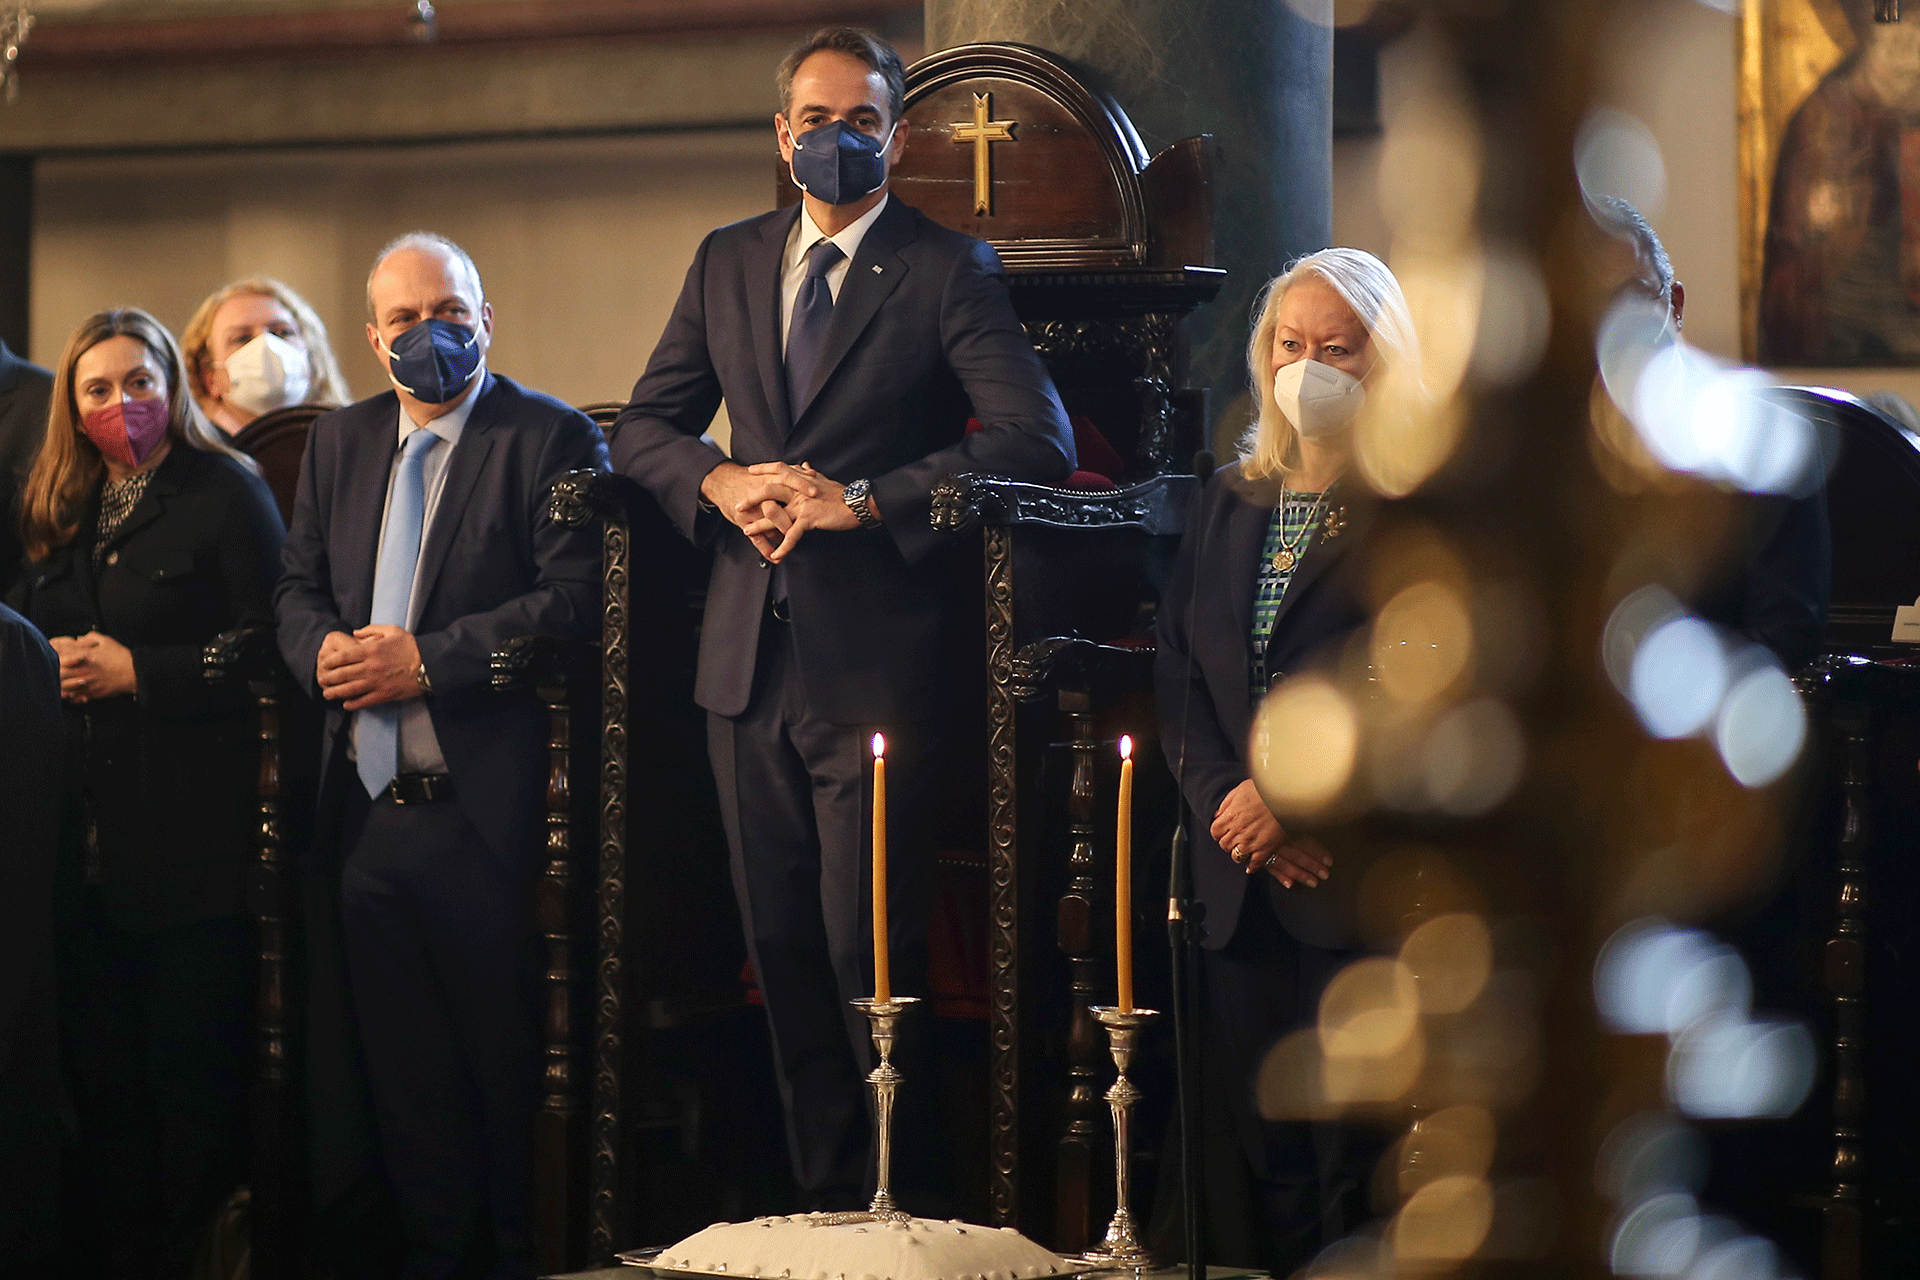 Greek Prime Minister Kyriakos Mitsotakis, center, attends a ceremony for Orthodox Christians at the Ecumenical Patriarchate of Constantinople, in Istanbul, Turkey, Sunday, March 13, 2022. 